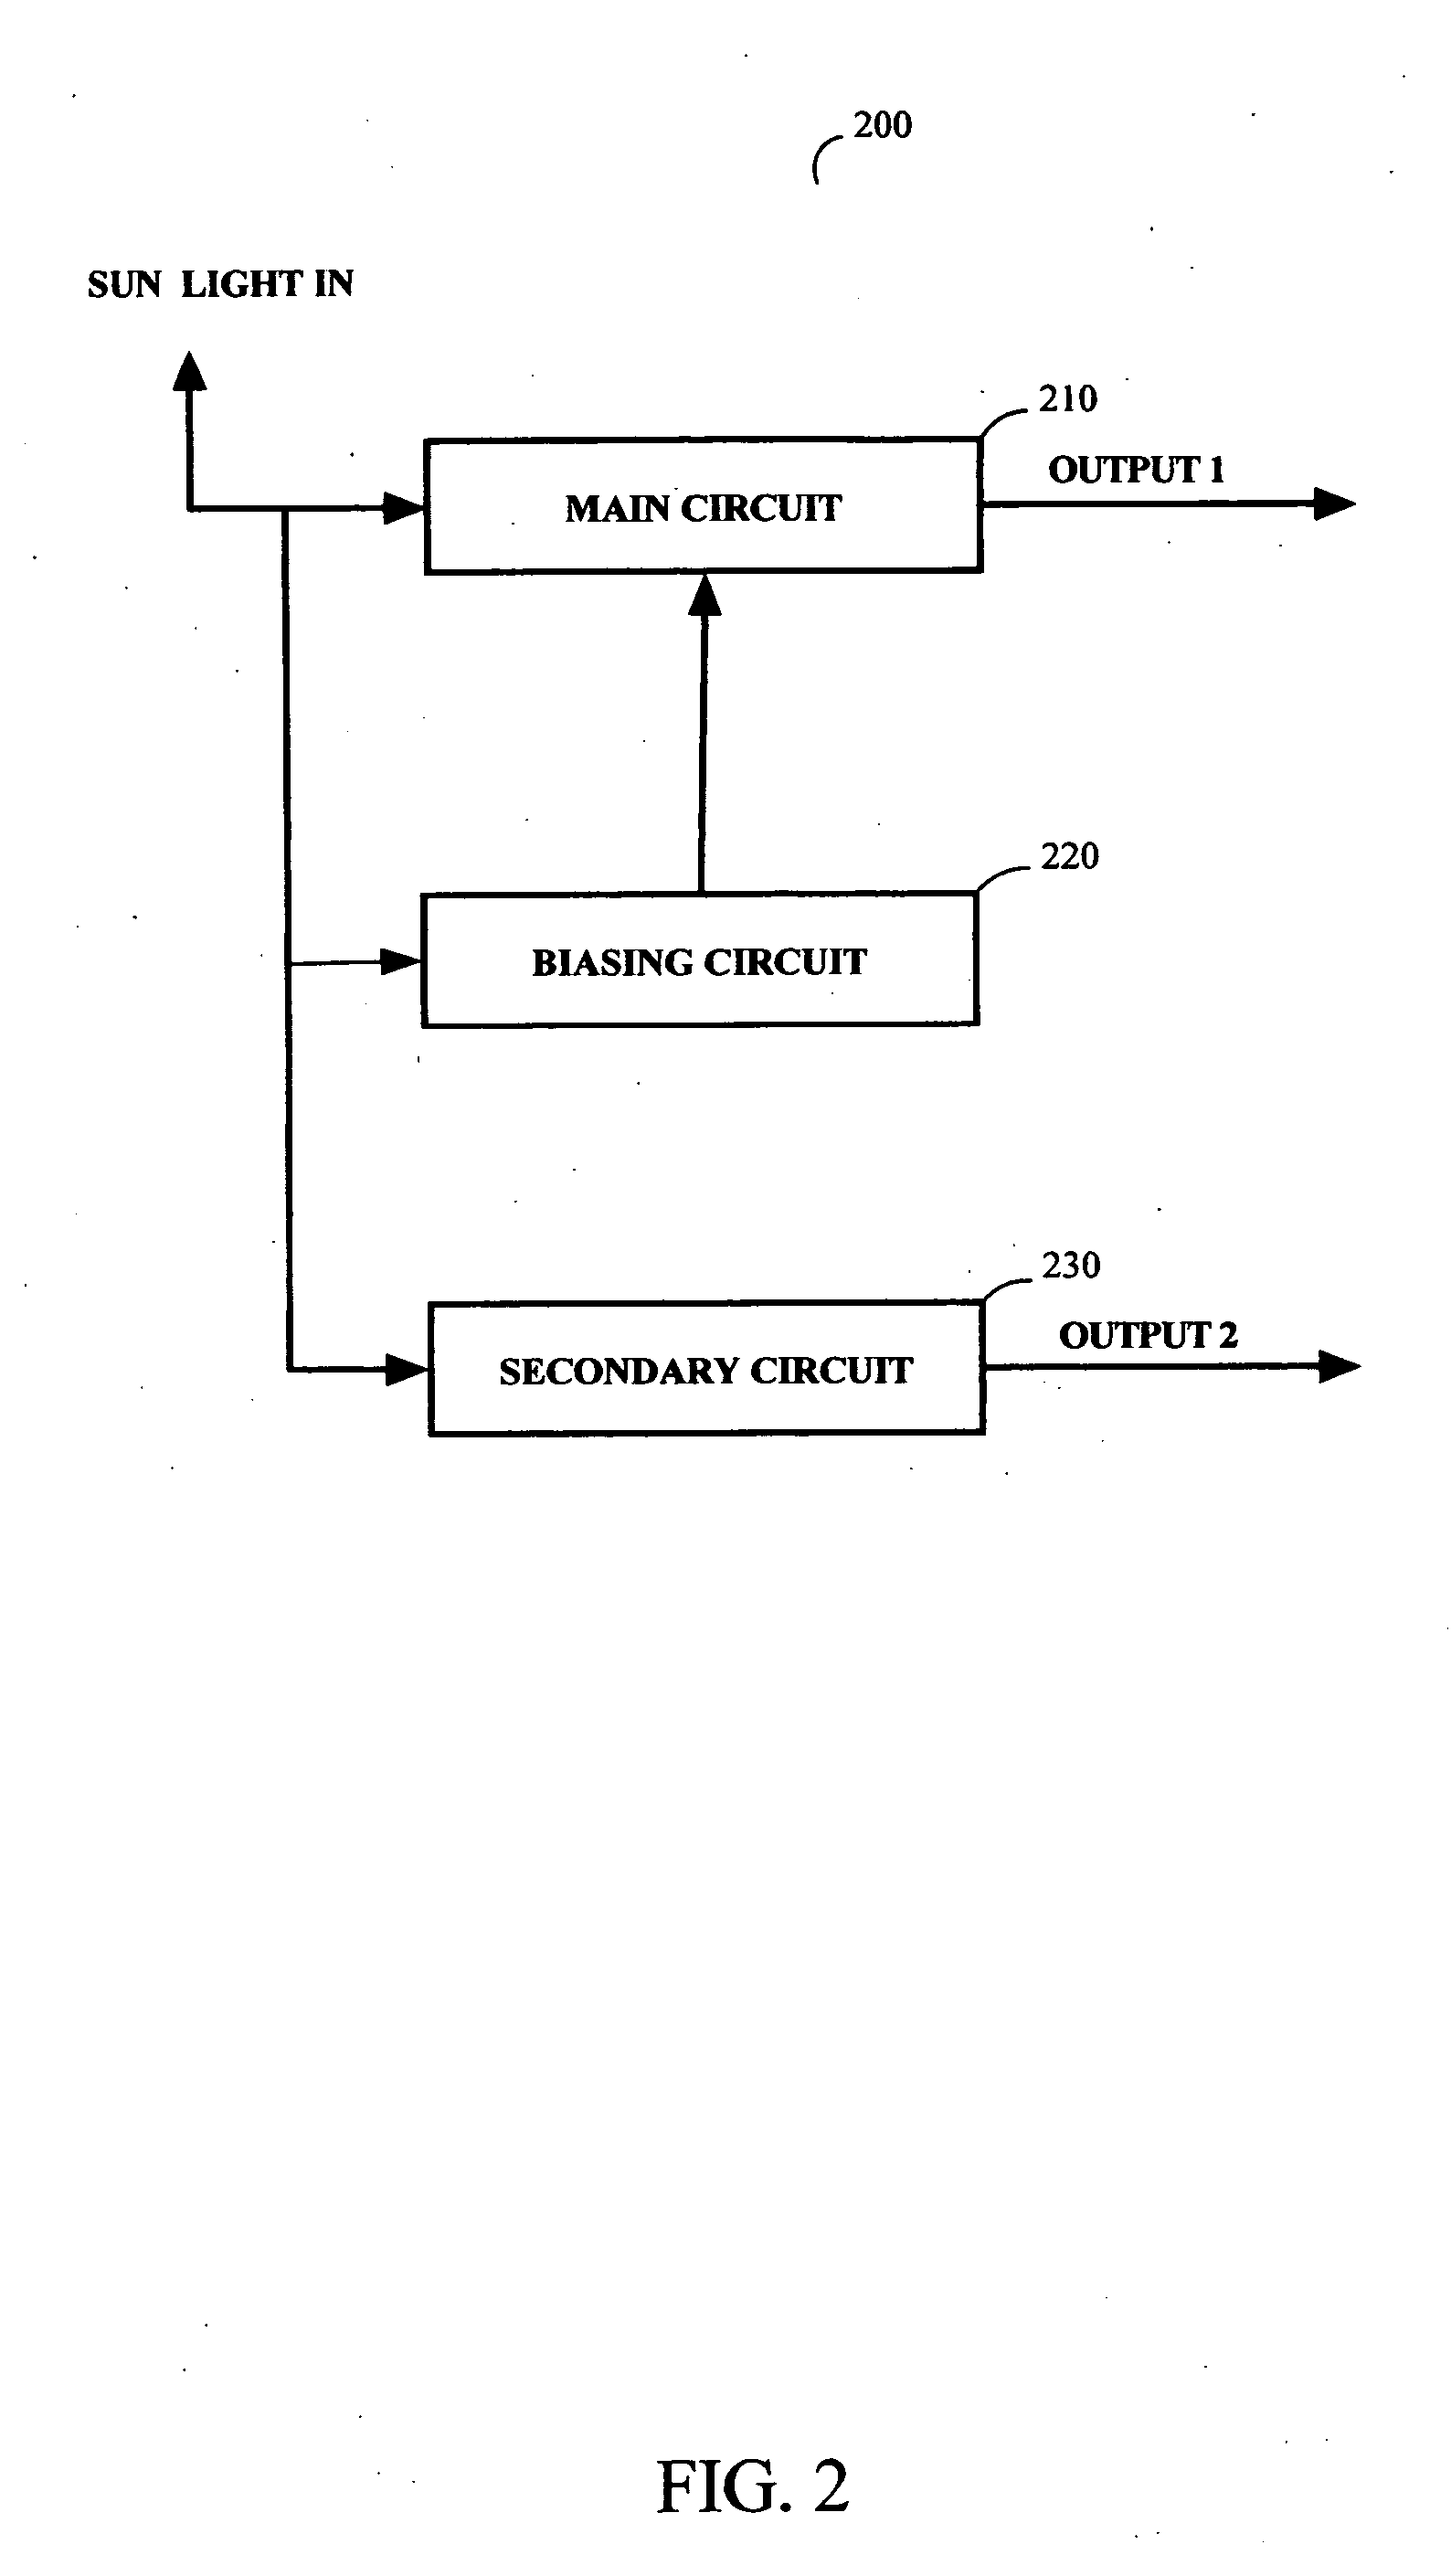 Photovoltaic cell a solar amplification device